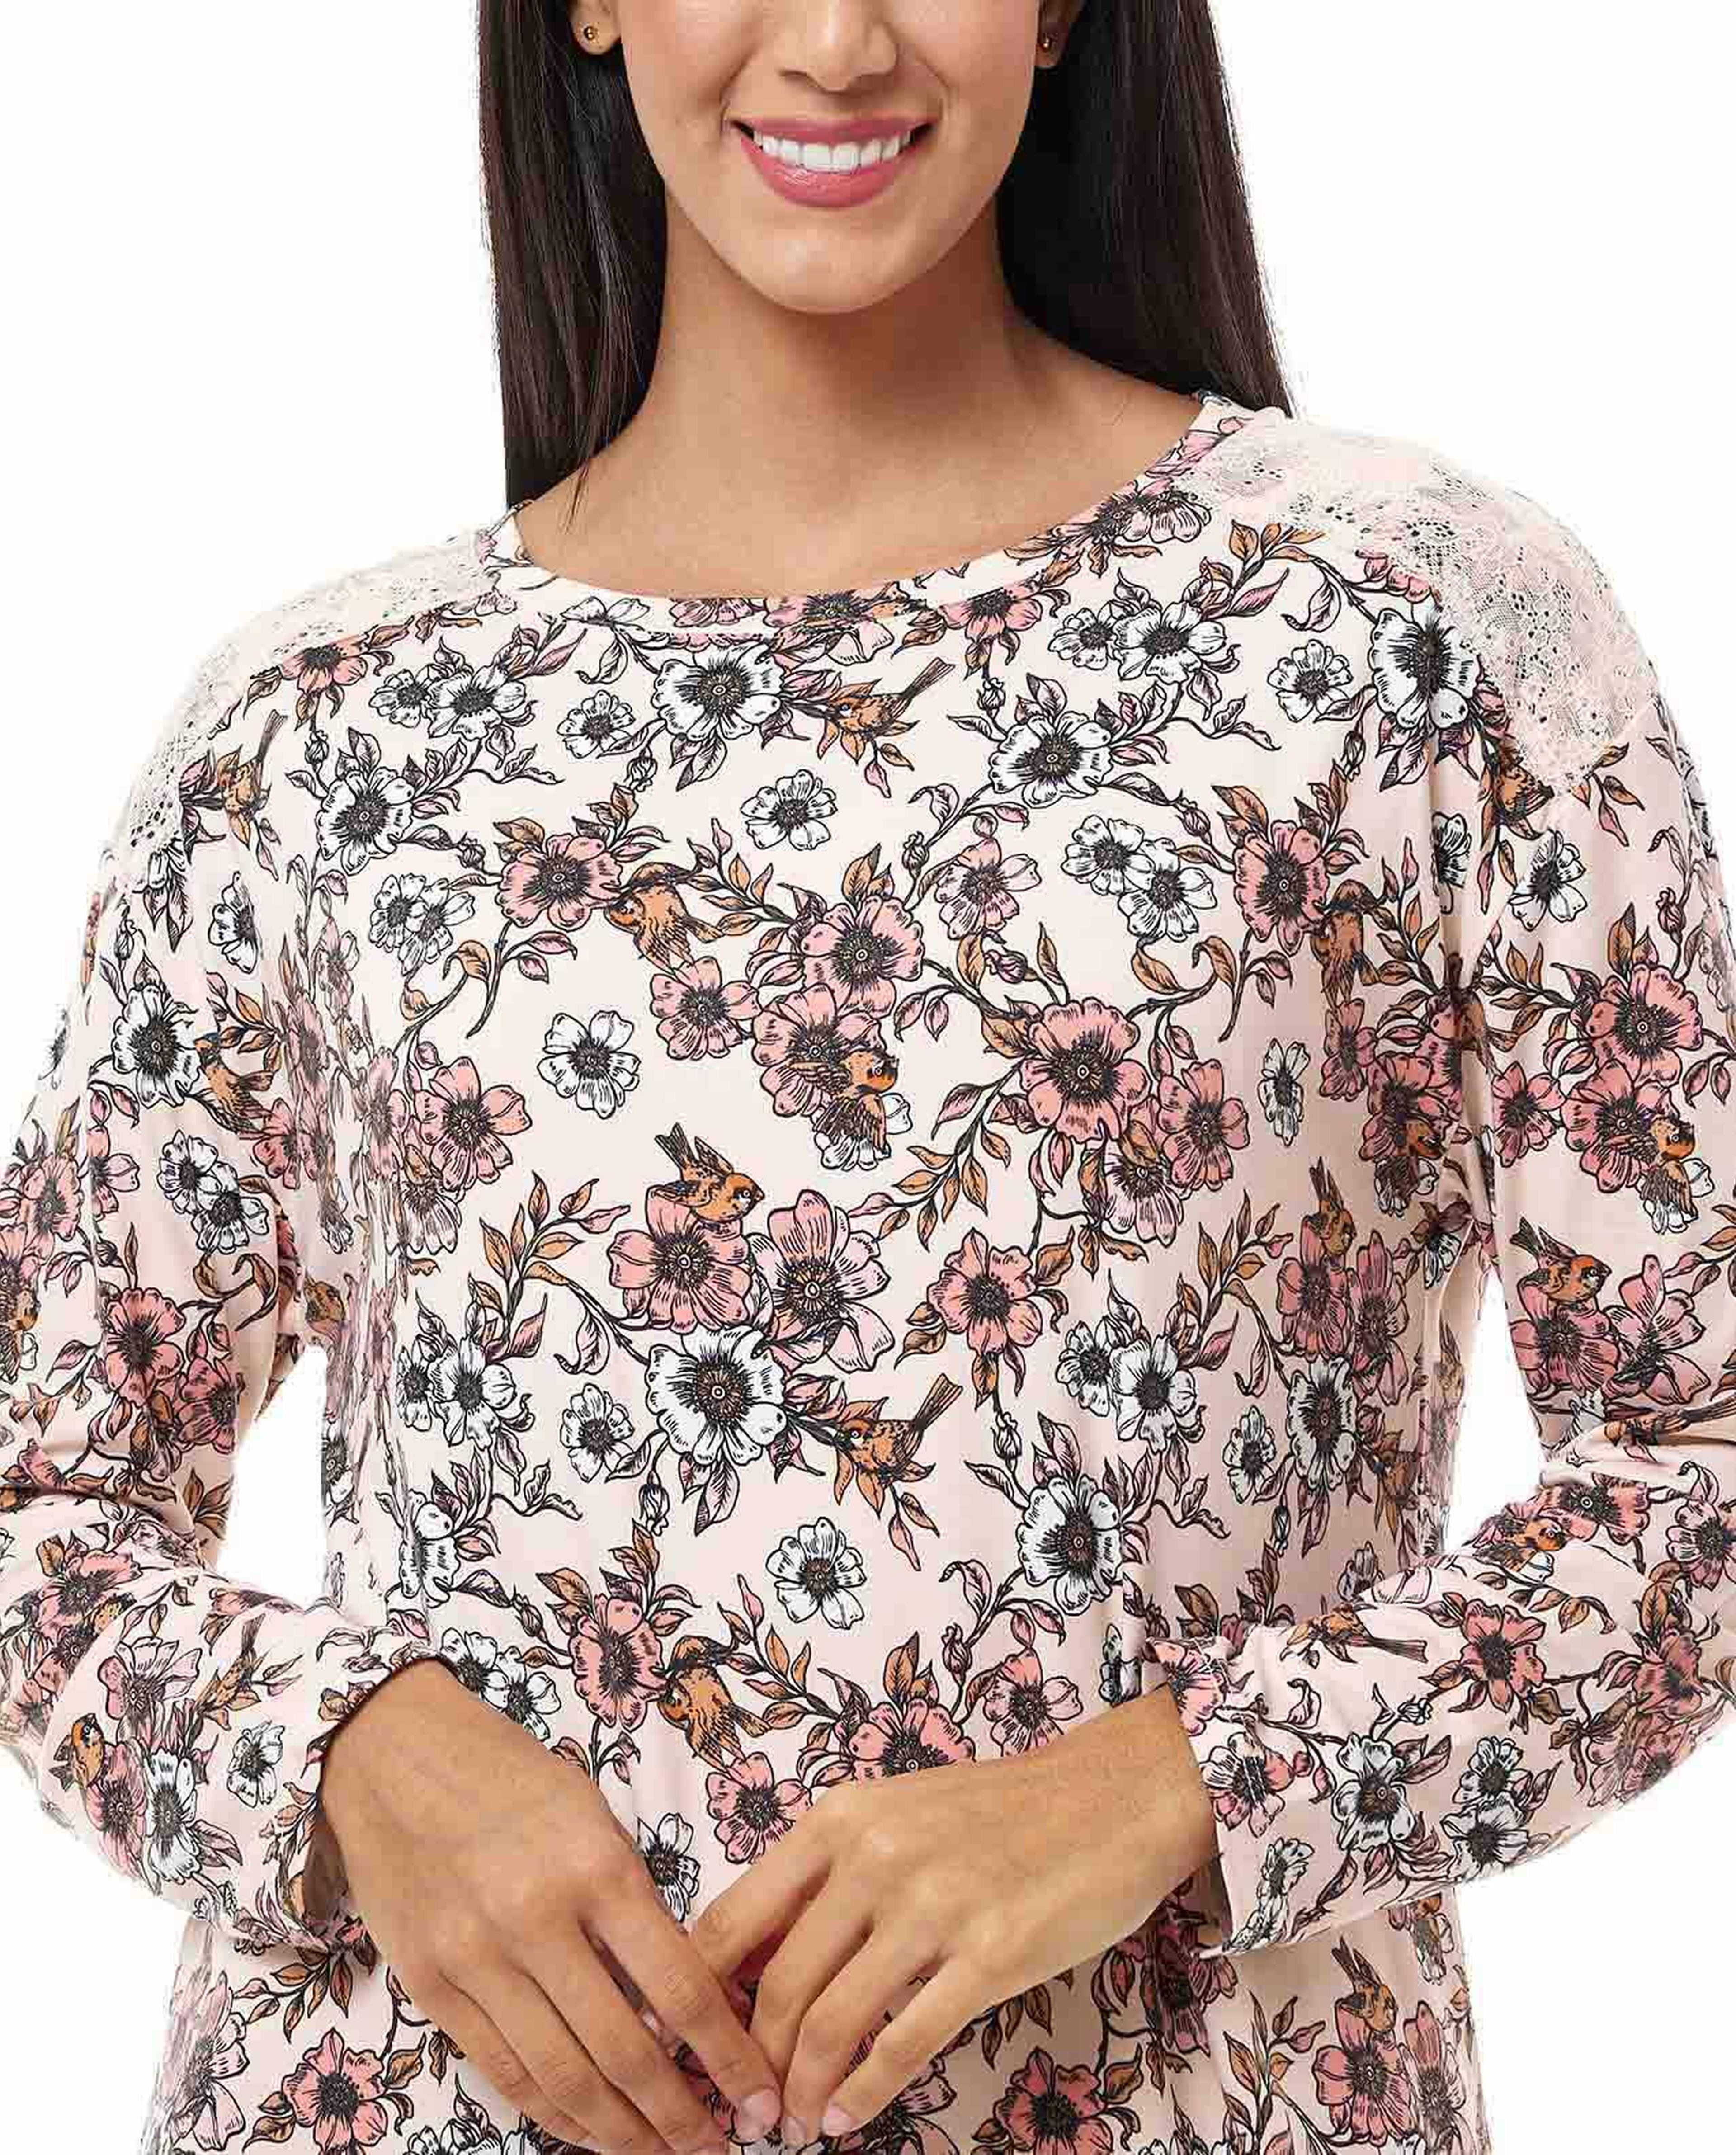 Floral Print Nightgown with Long Sleeves